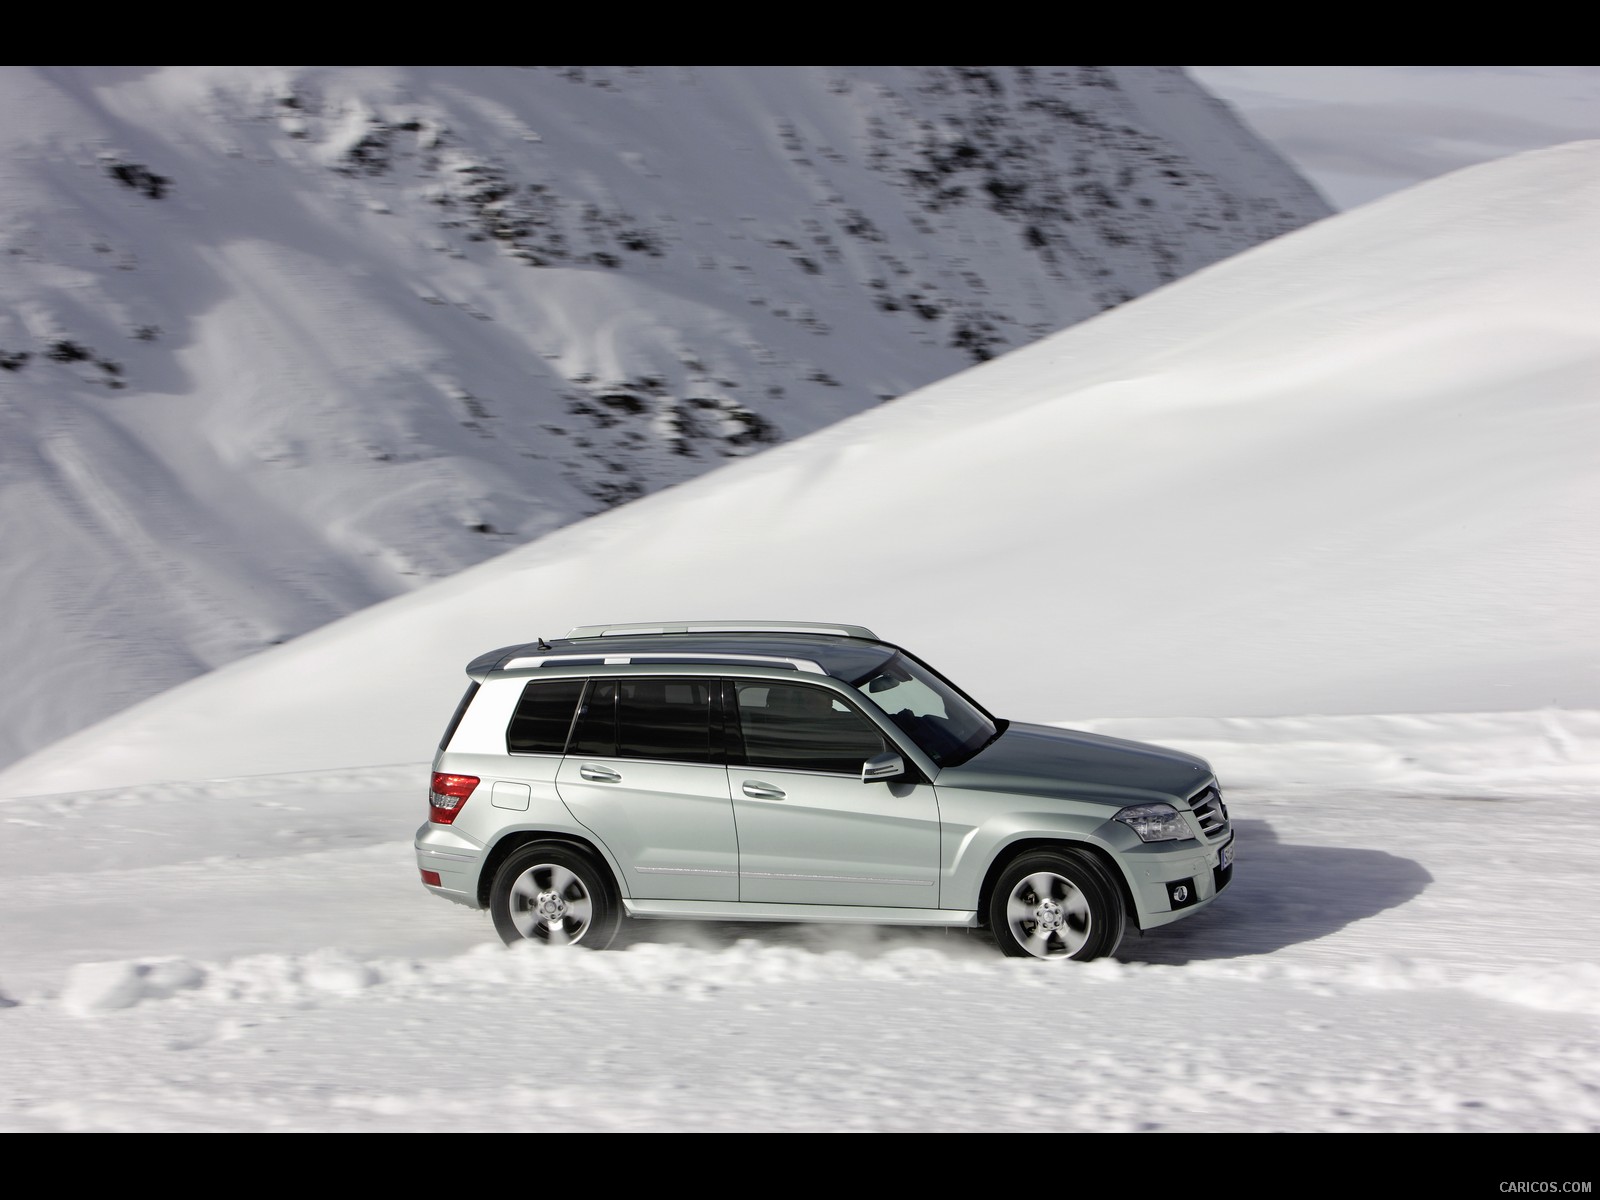 Mercedes-Benz GLK-Class - On Snow - Side, #34 of 351